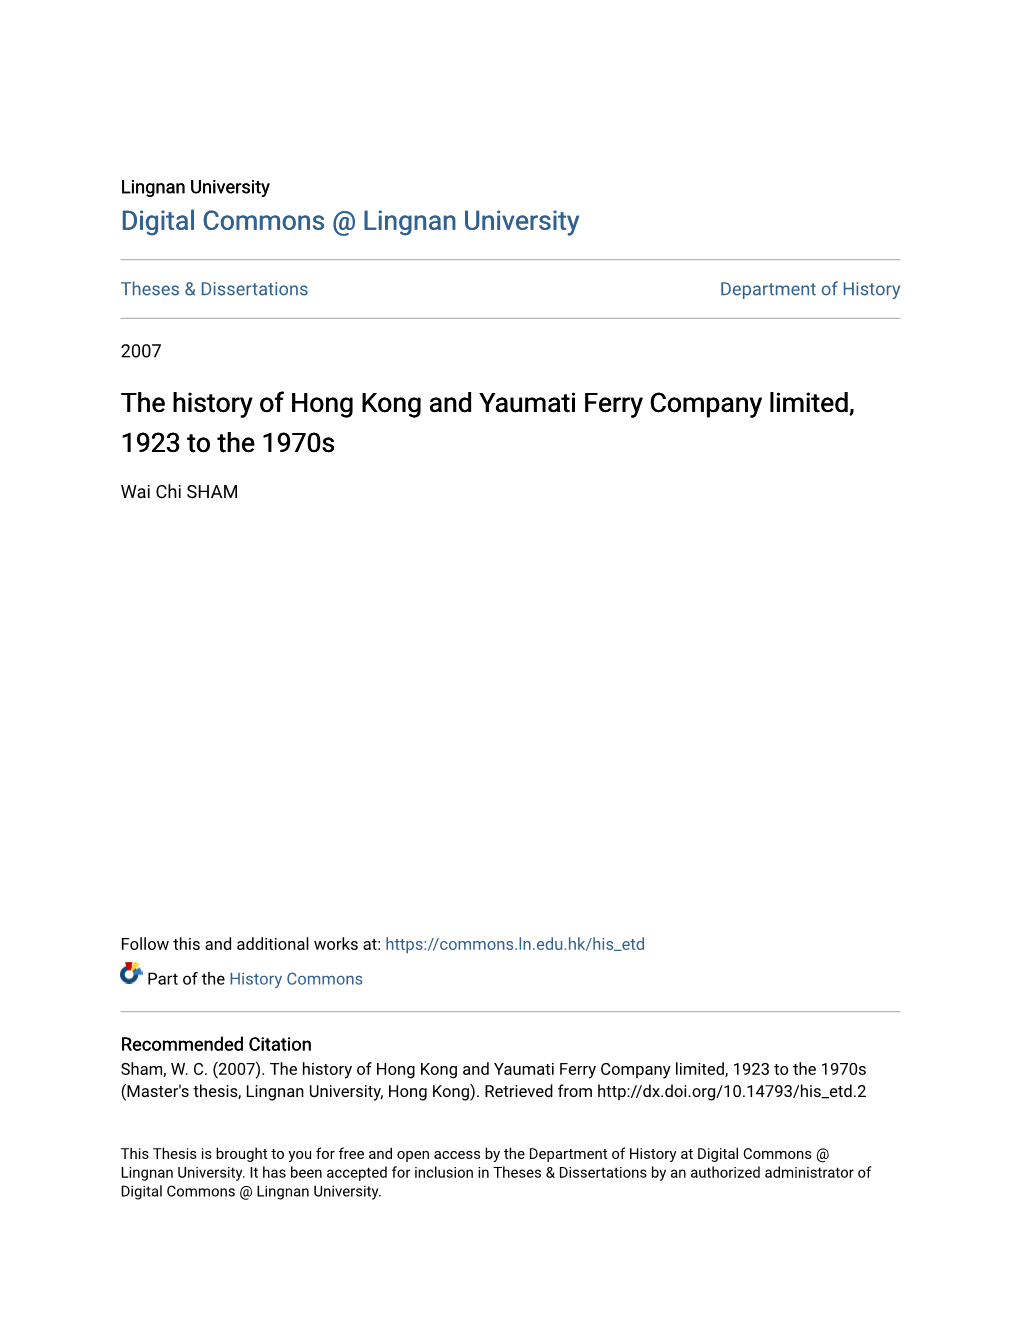 The History of Hong Kong and Yaumati Ferry Company Limited, 1923 to the 1970S